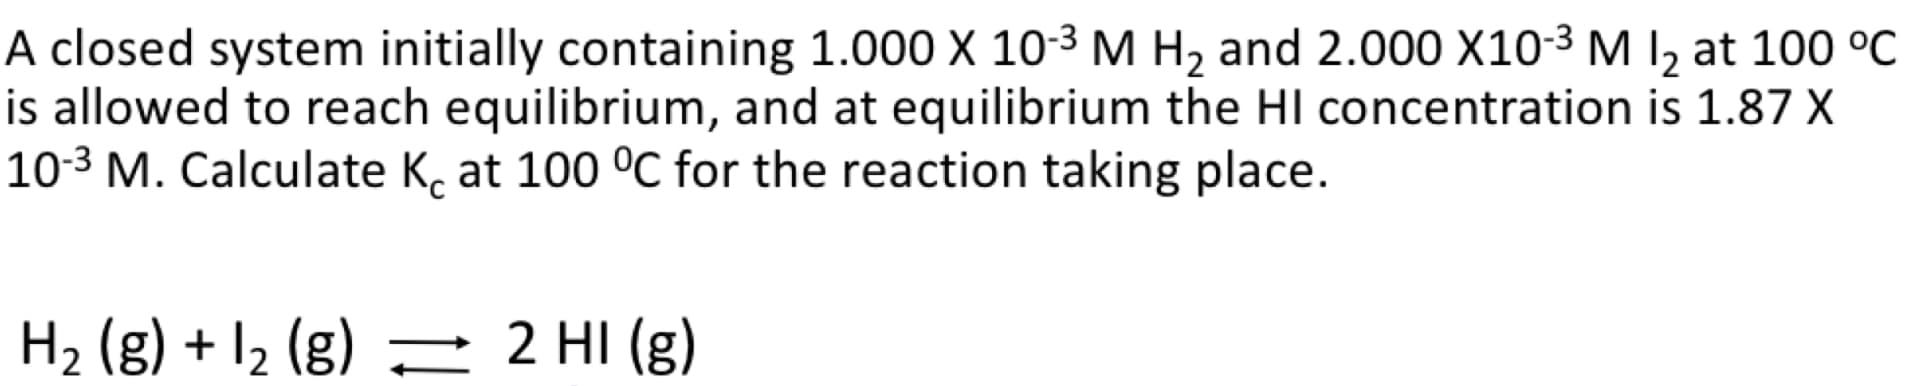 A closed system initially containing 1.000 X 10-3 M H2 and 2.000 X10-3 M I, at 100 °C
is allowed to reach equilibrium, and at equilibrium the HI concentration is 1.87 X
10-3 M. Calculate K, at 100 °C for the reaction taking place.
H2 (g) + I2 (g) – 2 HI (g)
